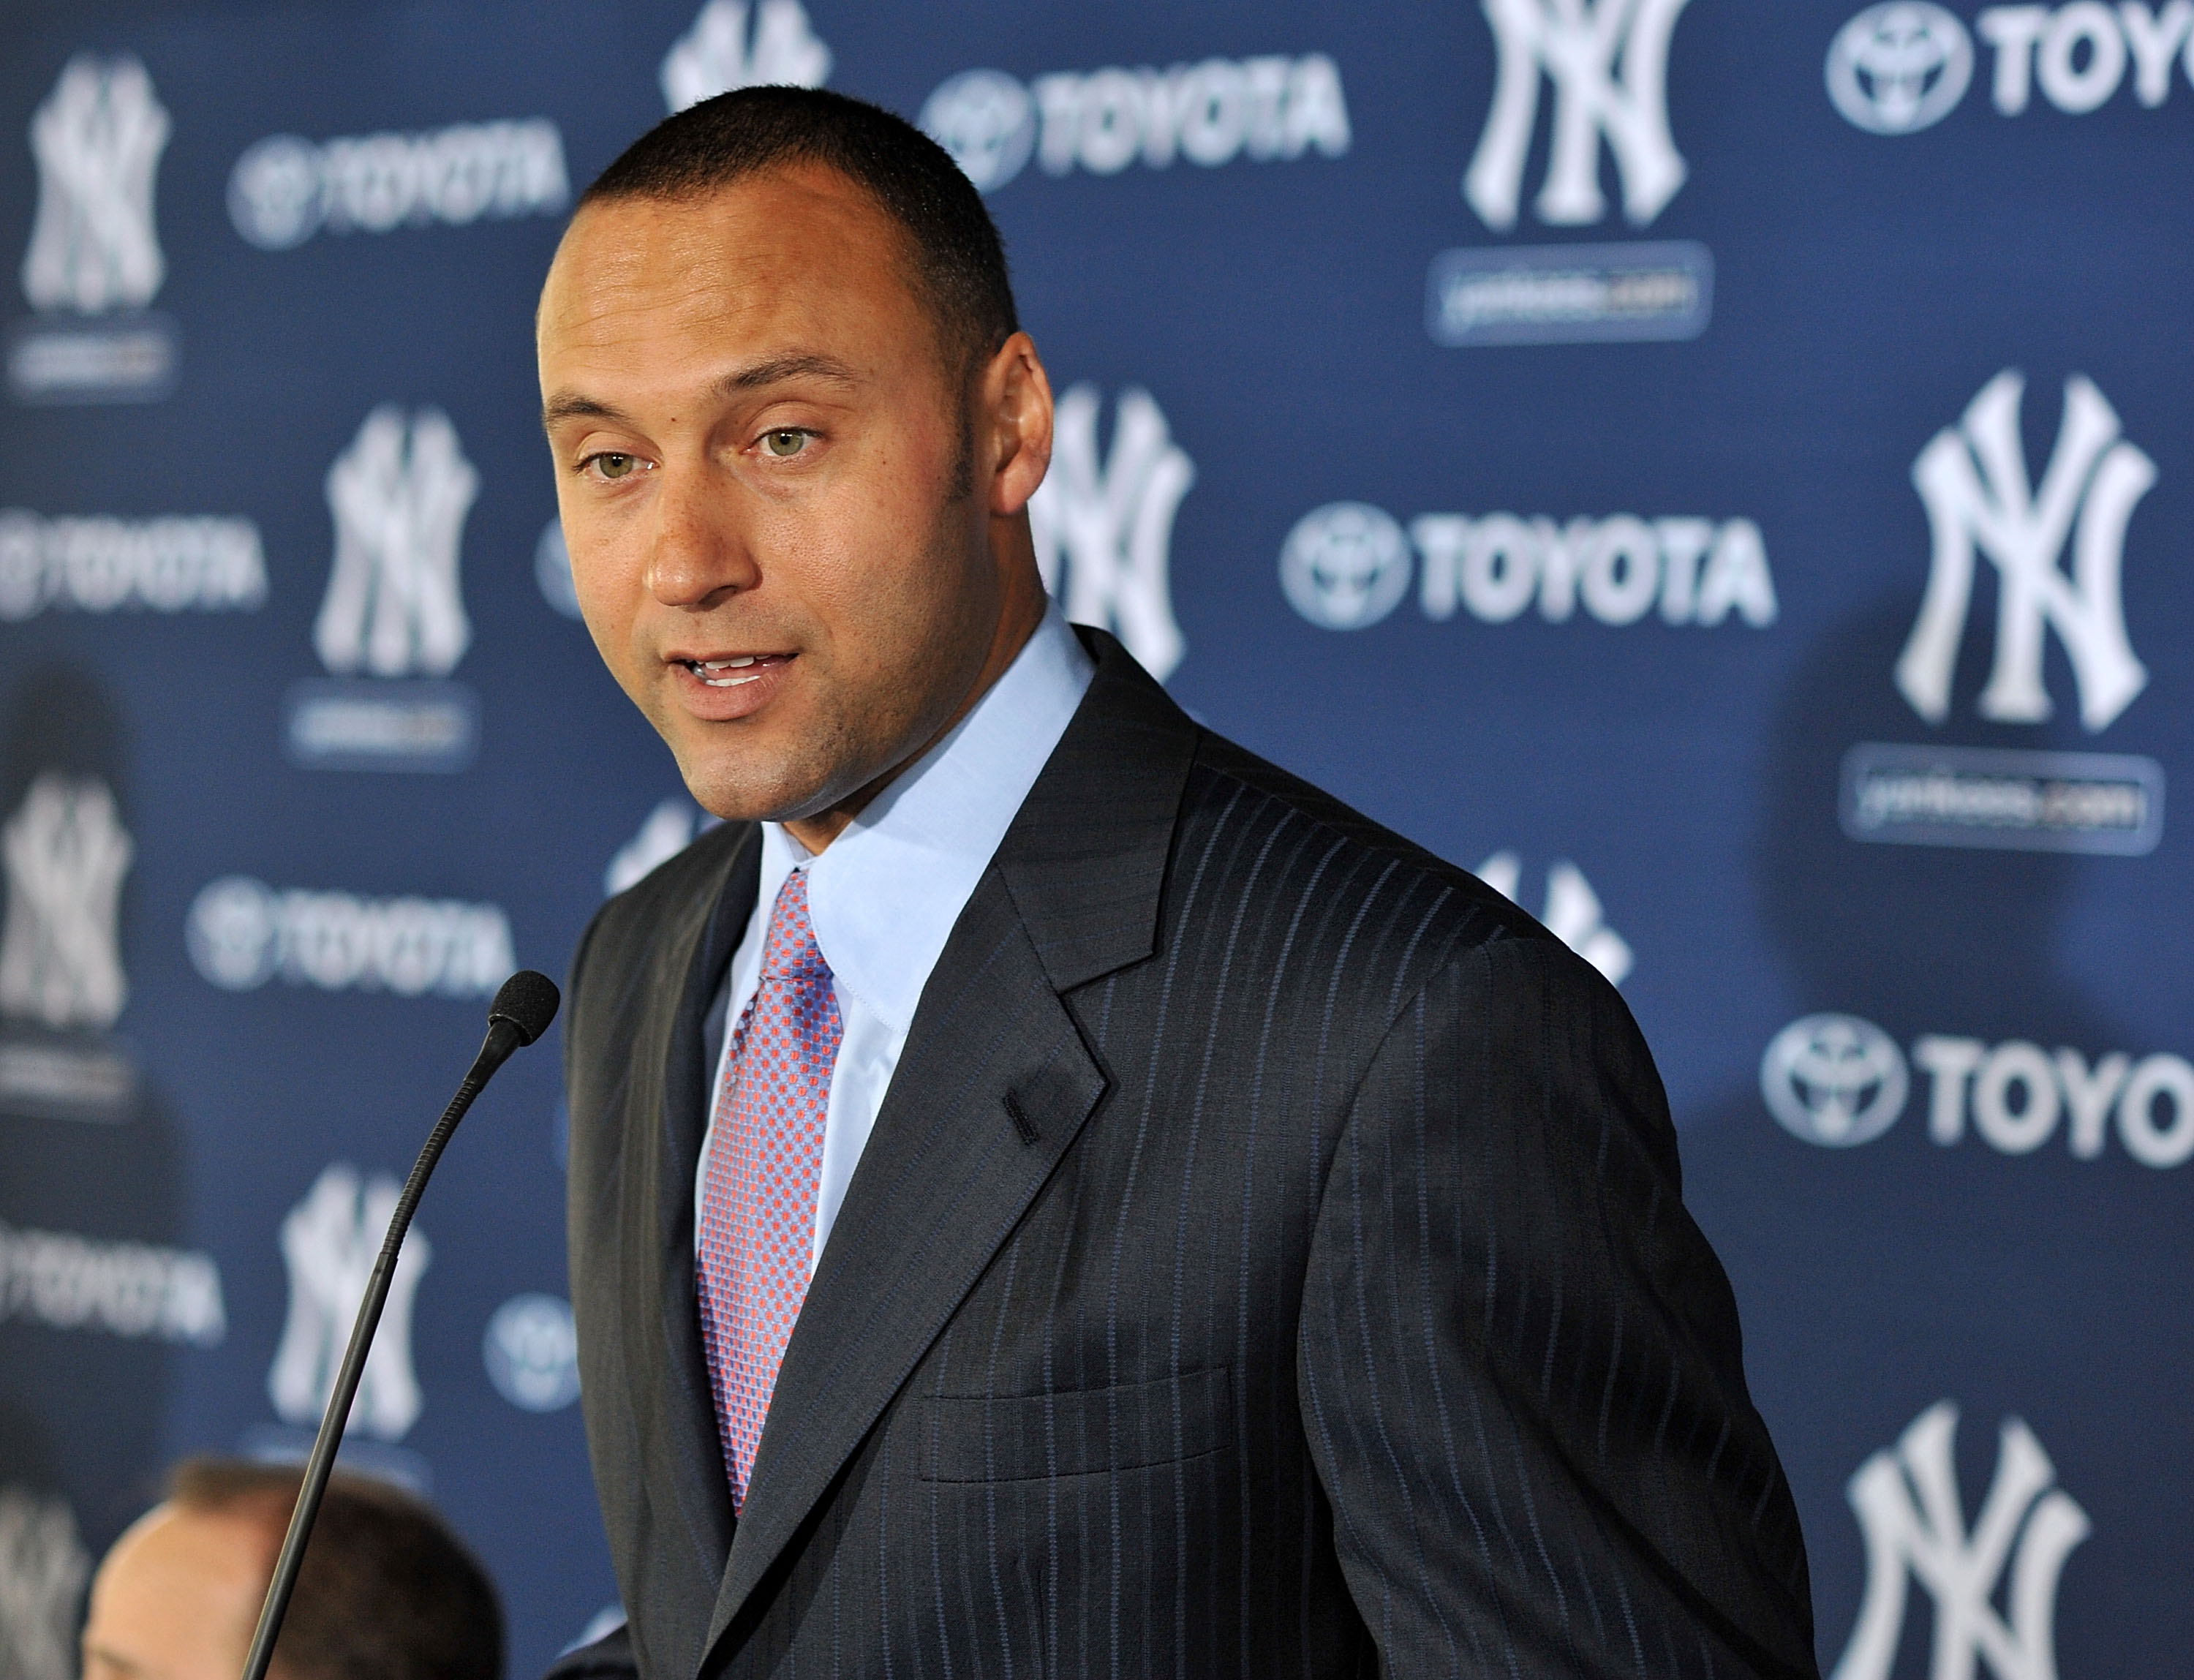 Jeter Is Shortstop and Elder Statesman for U.S. Team - The New York Times